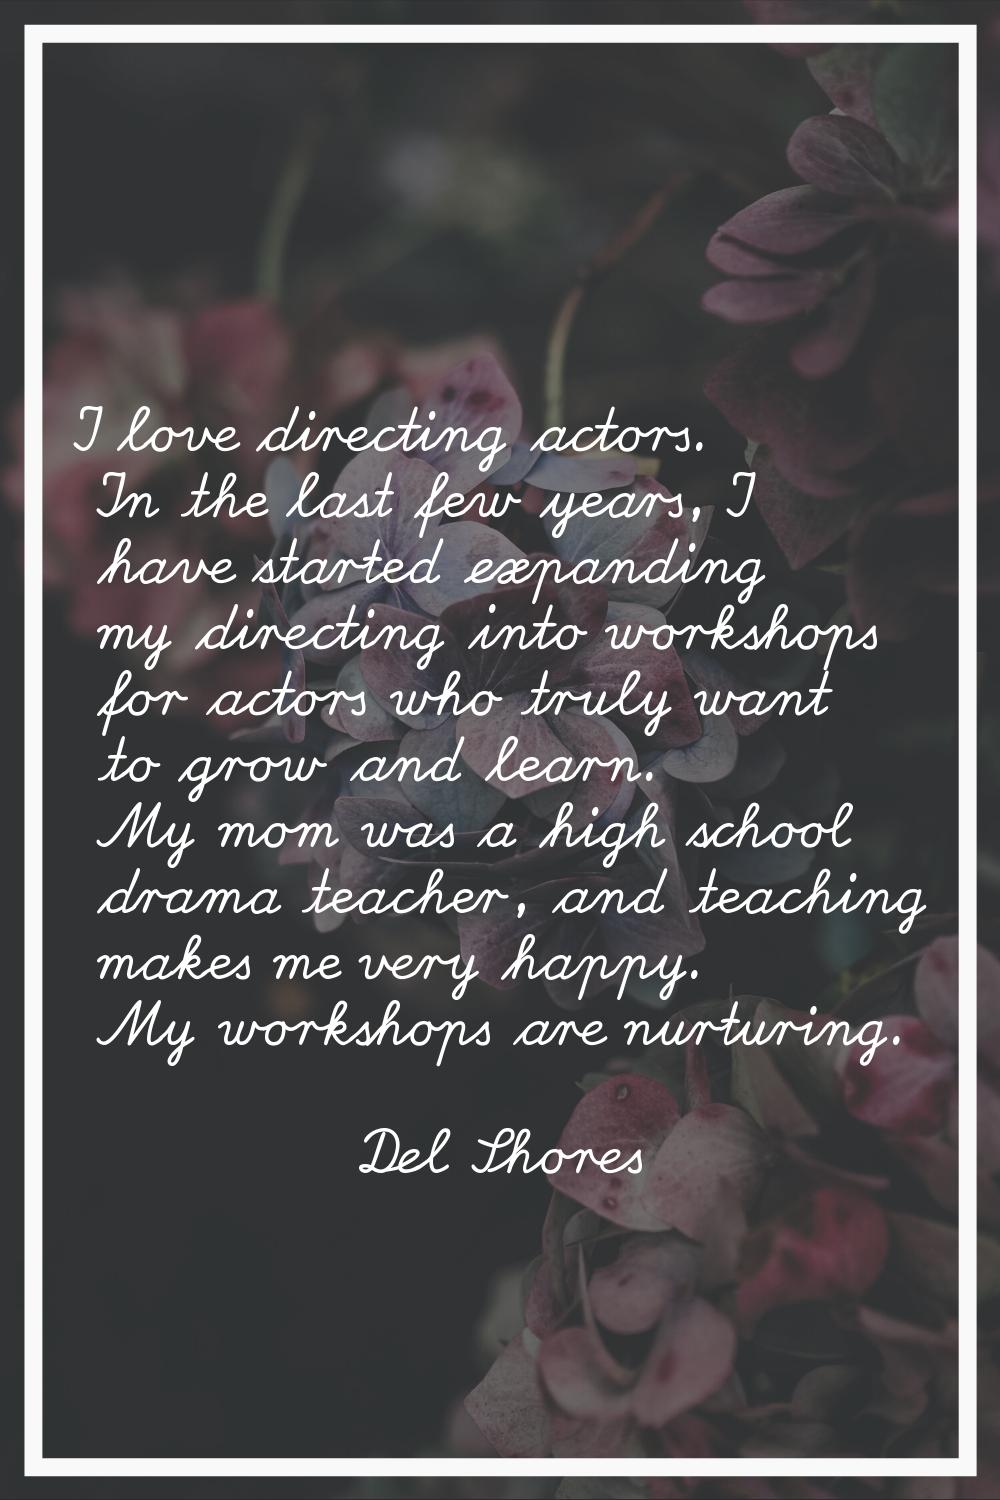 I love directing actors. In the last few years, I have started expanding my directing into workshop